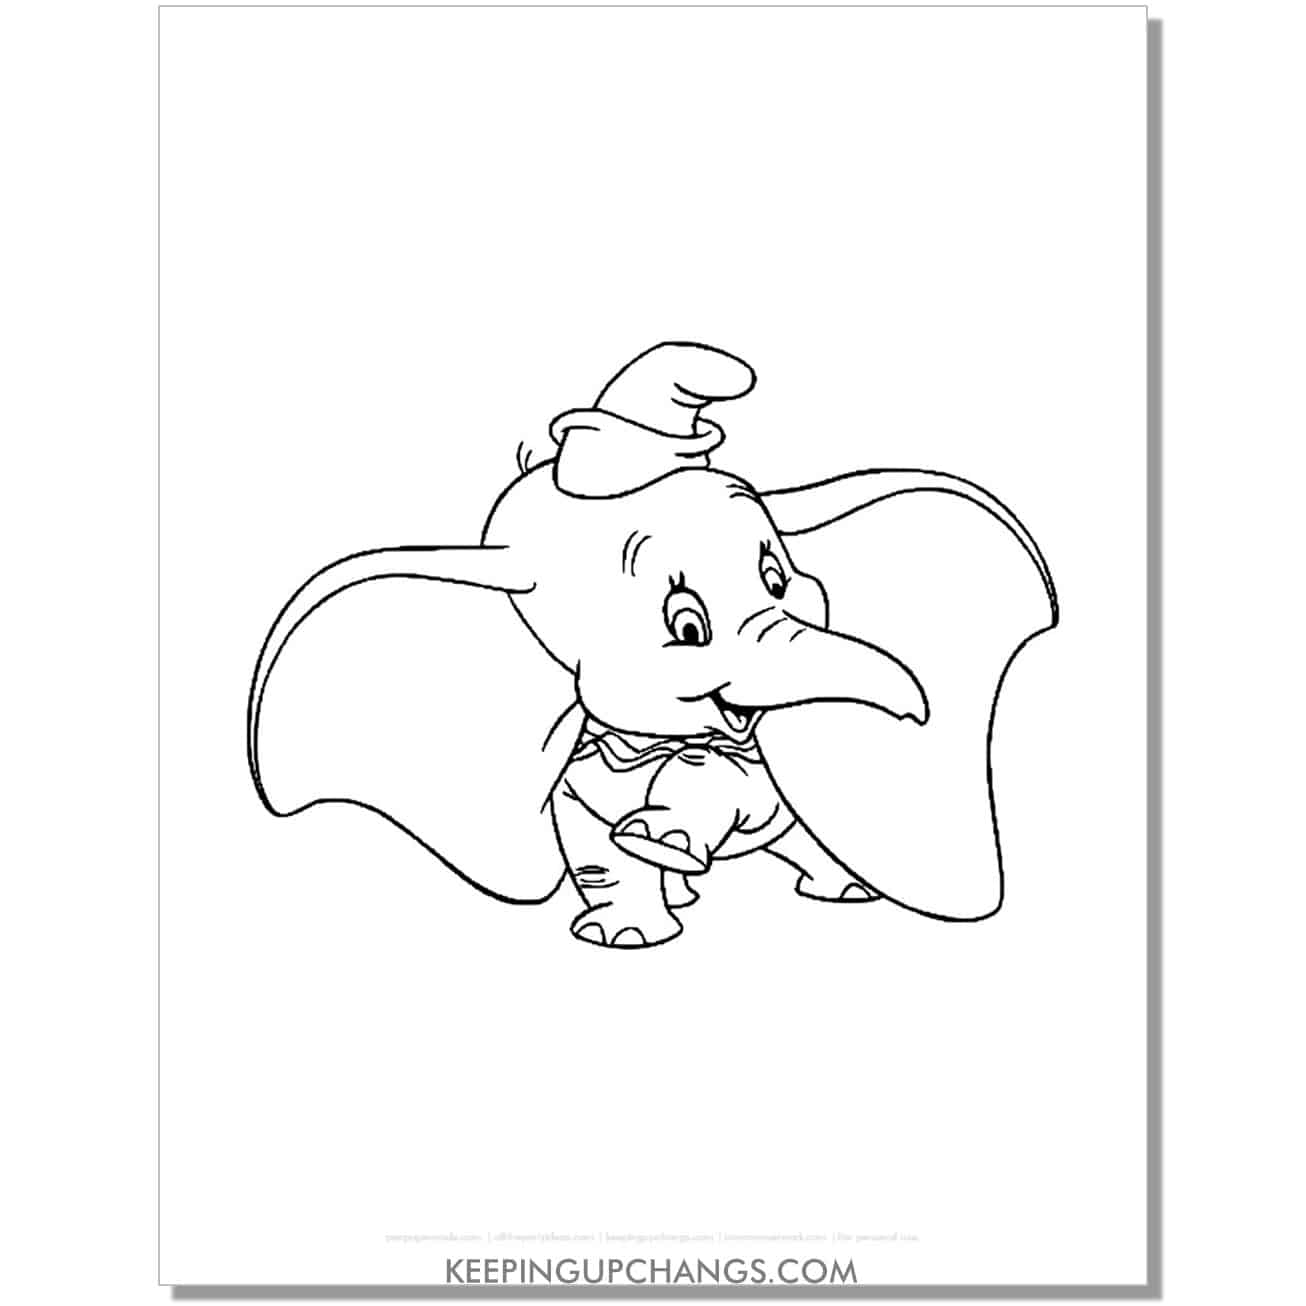 dumbo with large, flappy ears coloring page, sheet.